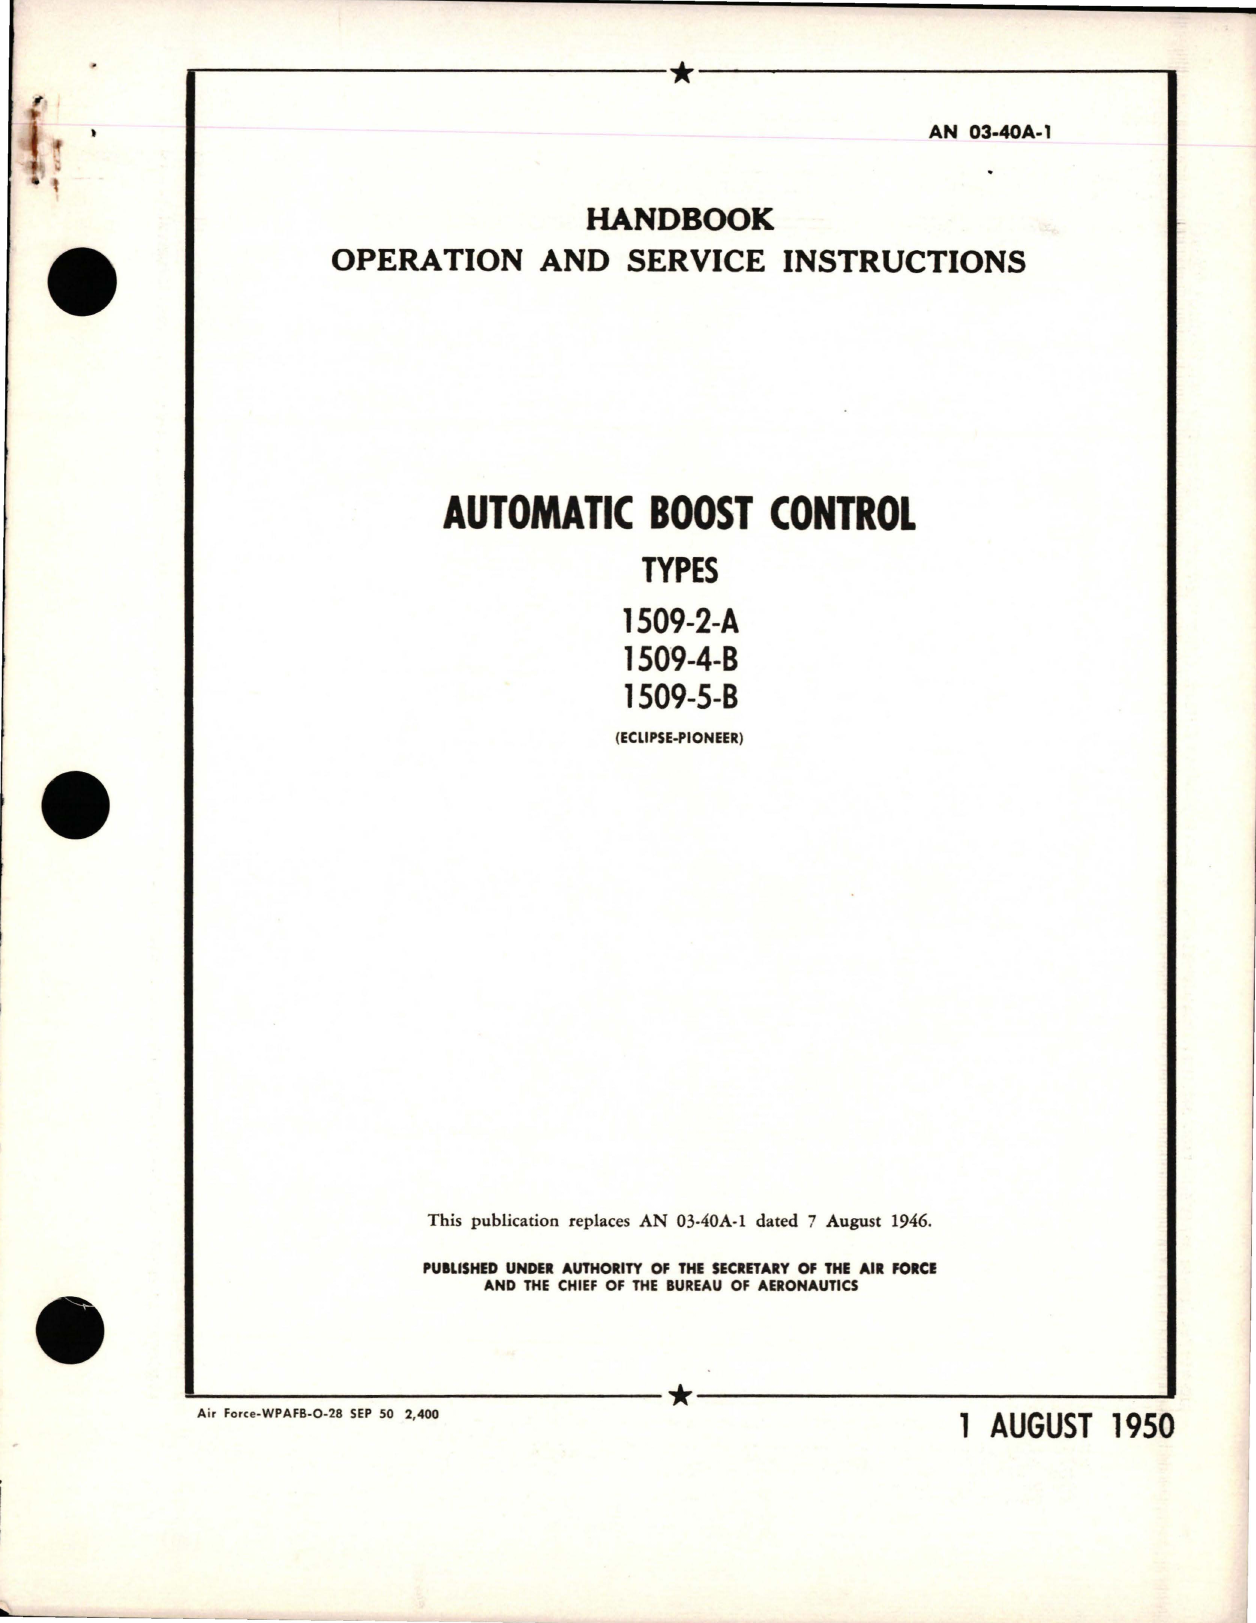 Sample page 1 from AirCorps Library document: Operation and Service Instructions for Automatic Boost Control - Types 1509-2-A, 1509-4-B, and 1509-5-B